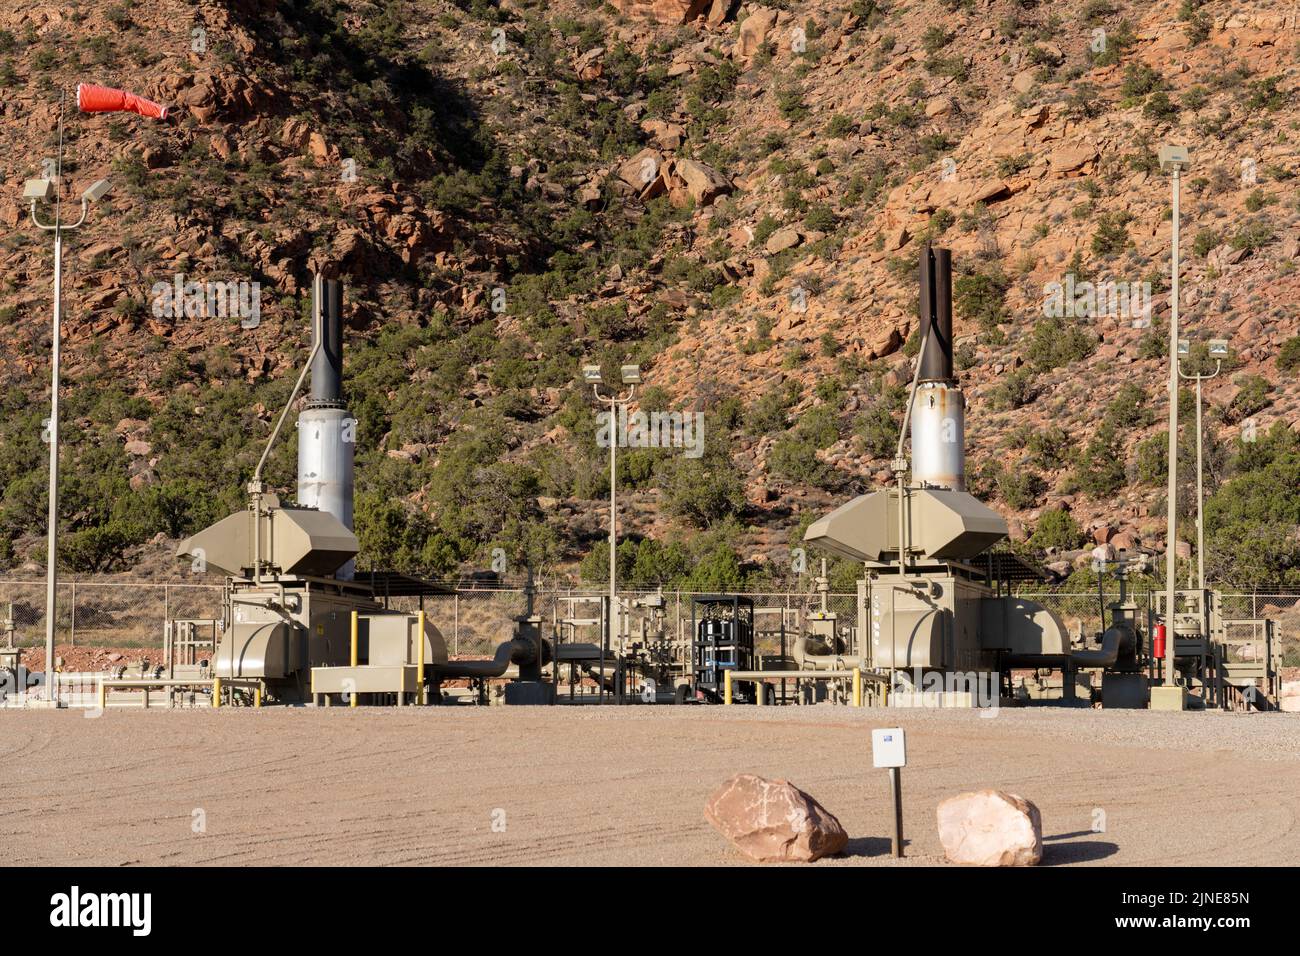 A small compressor station for an 12' LNG or liquified natural gas pipeline in Spanish Valley, near Moab, Utah. Stock Photo